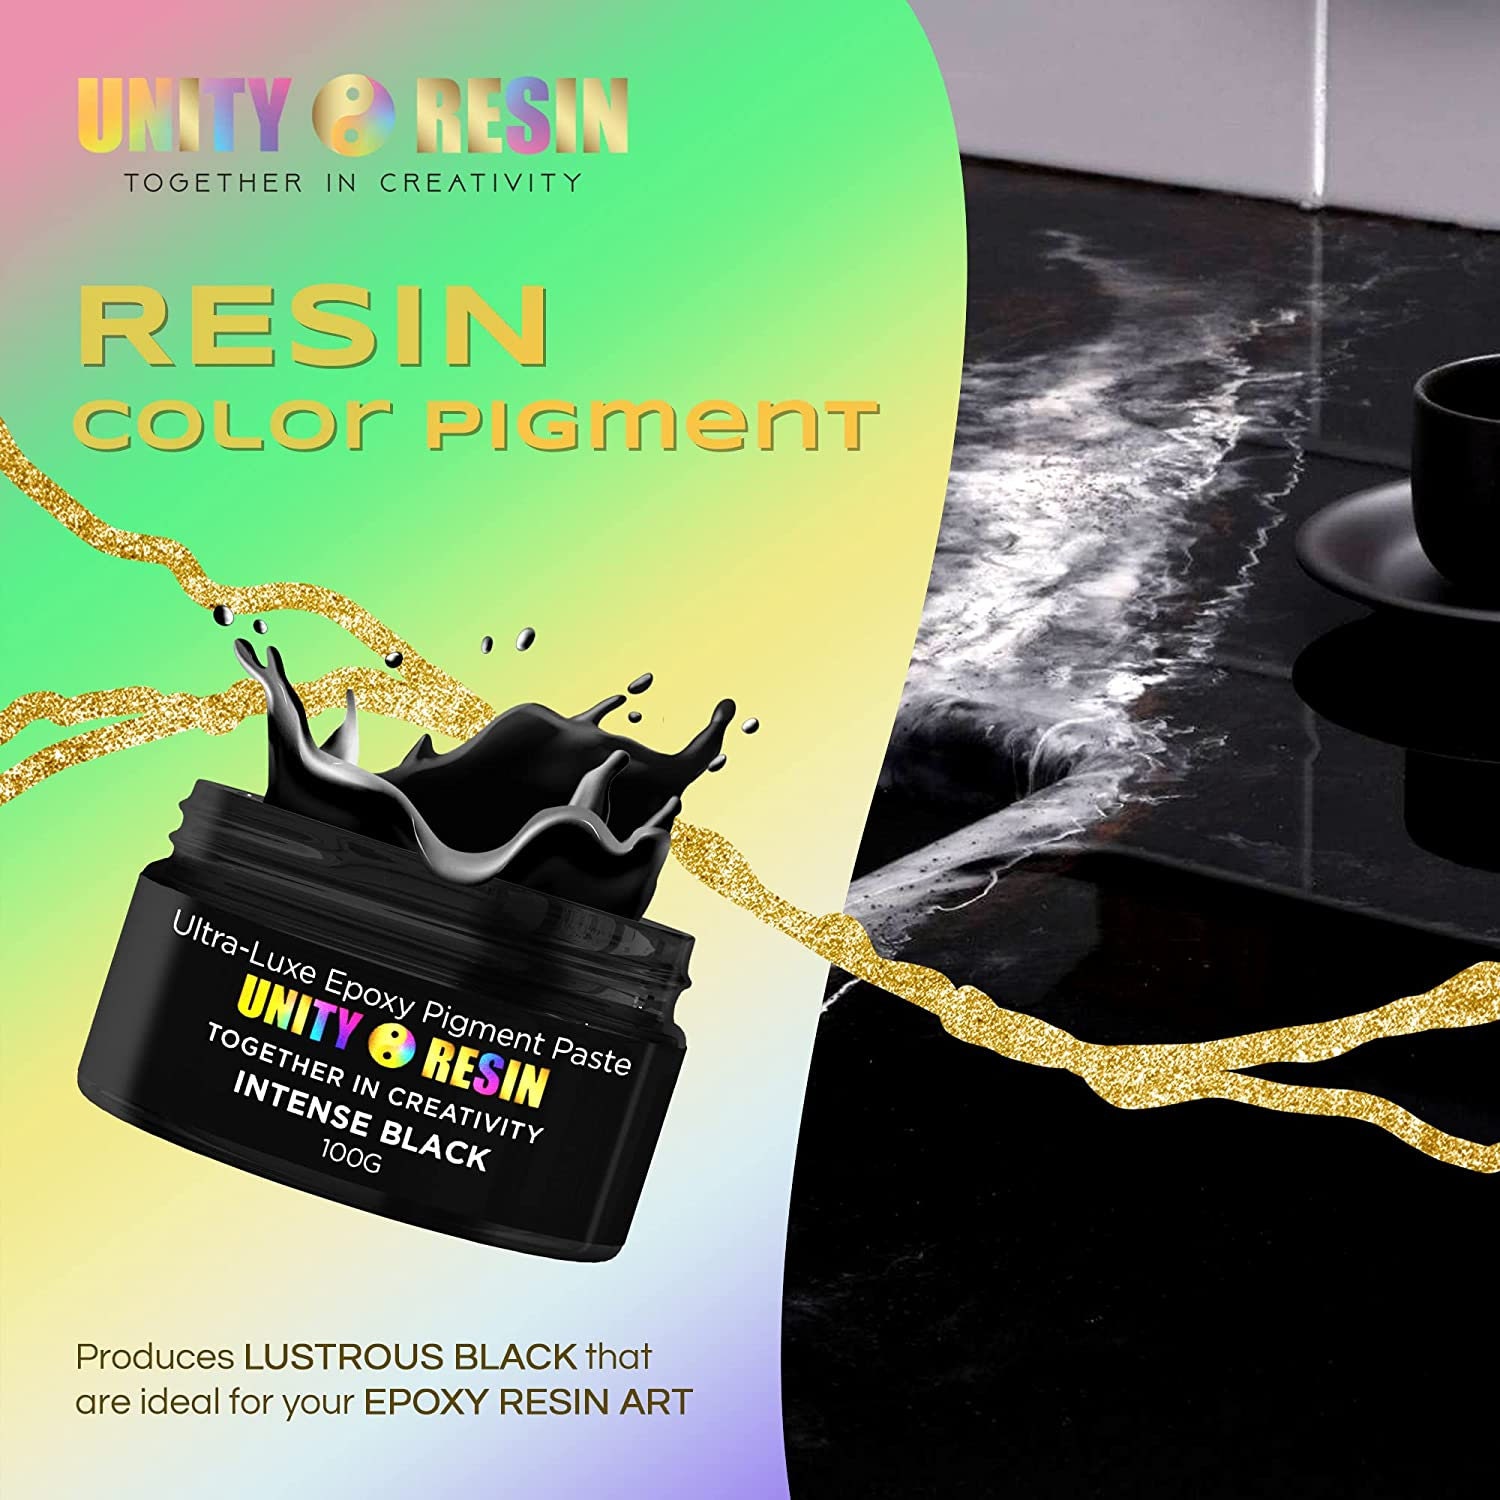 Luci Clear Resin Pigment Paste - Black